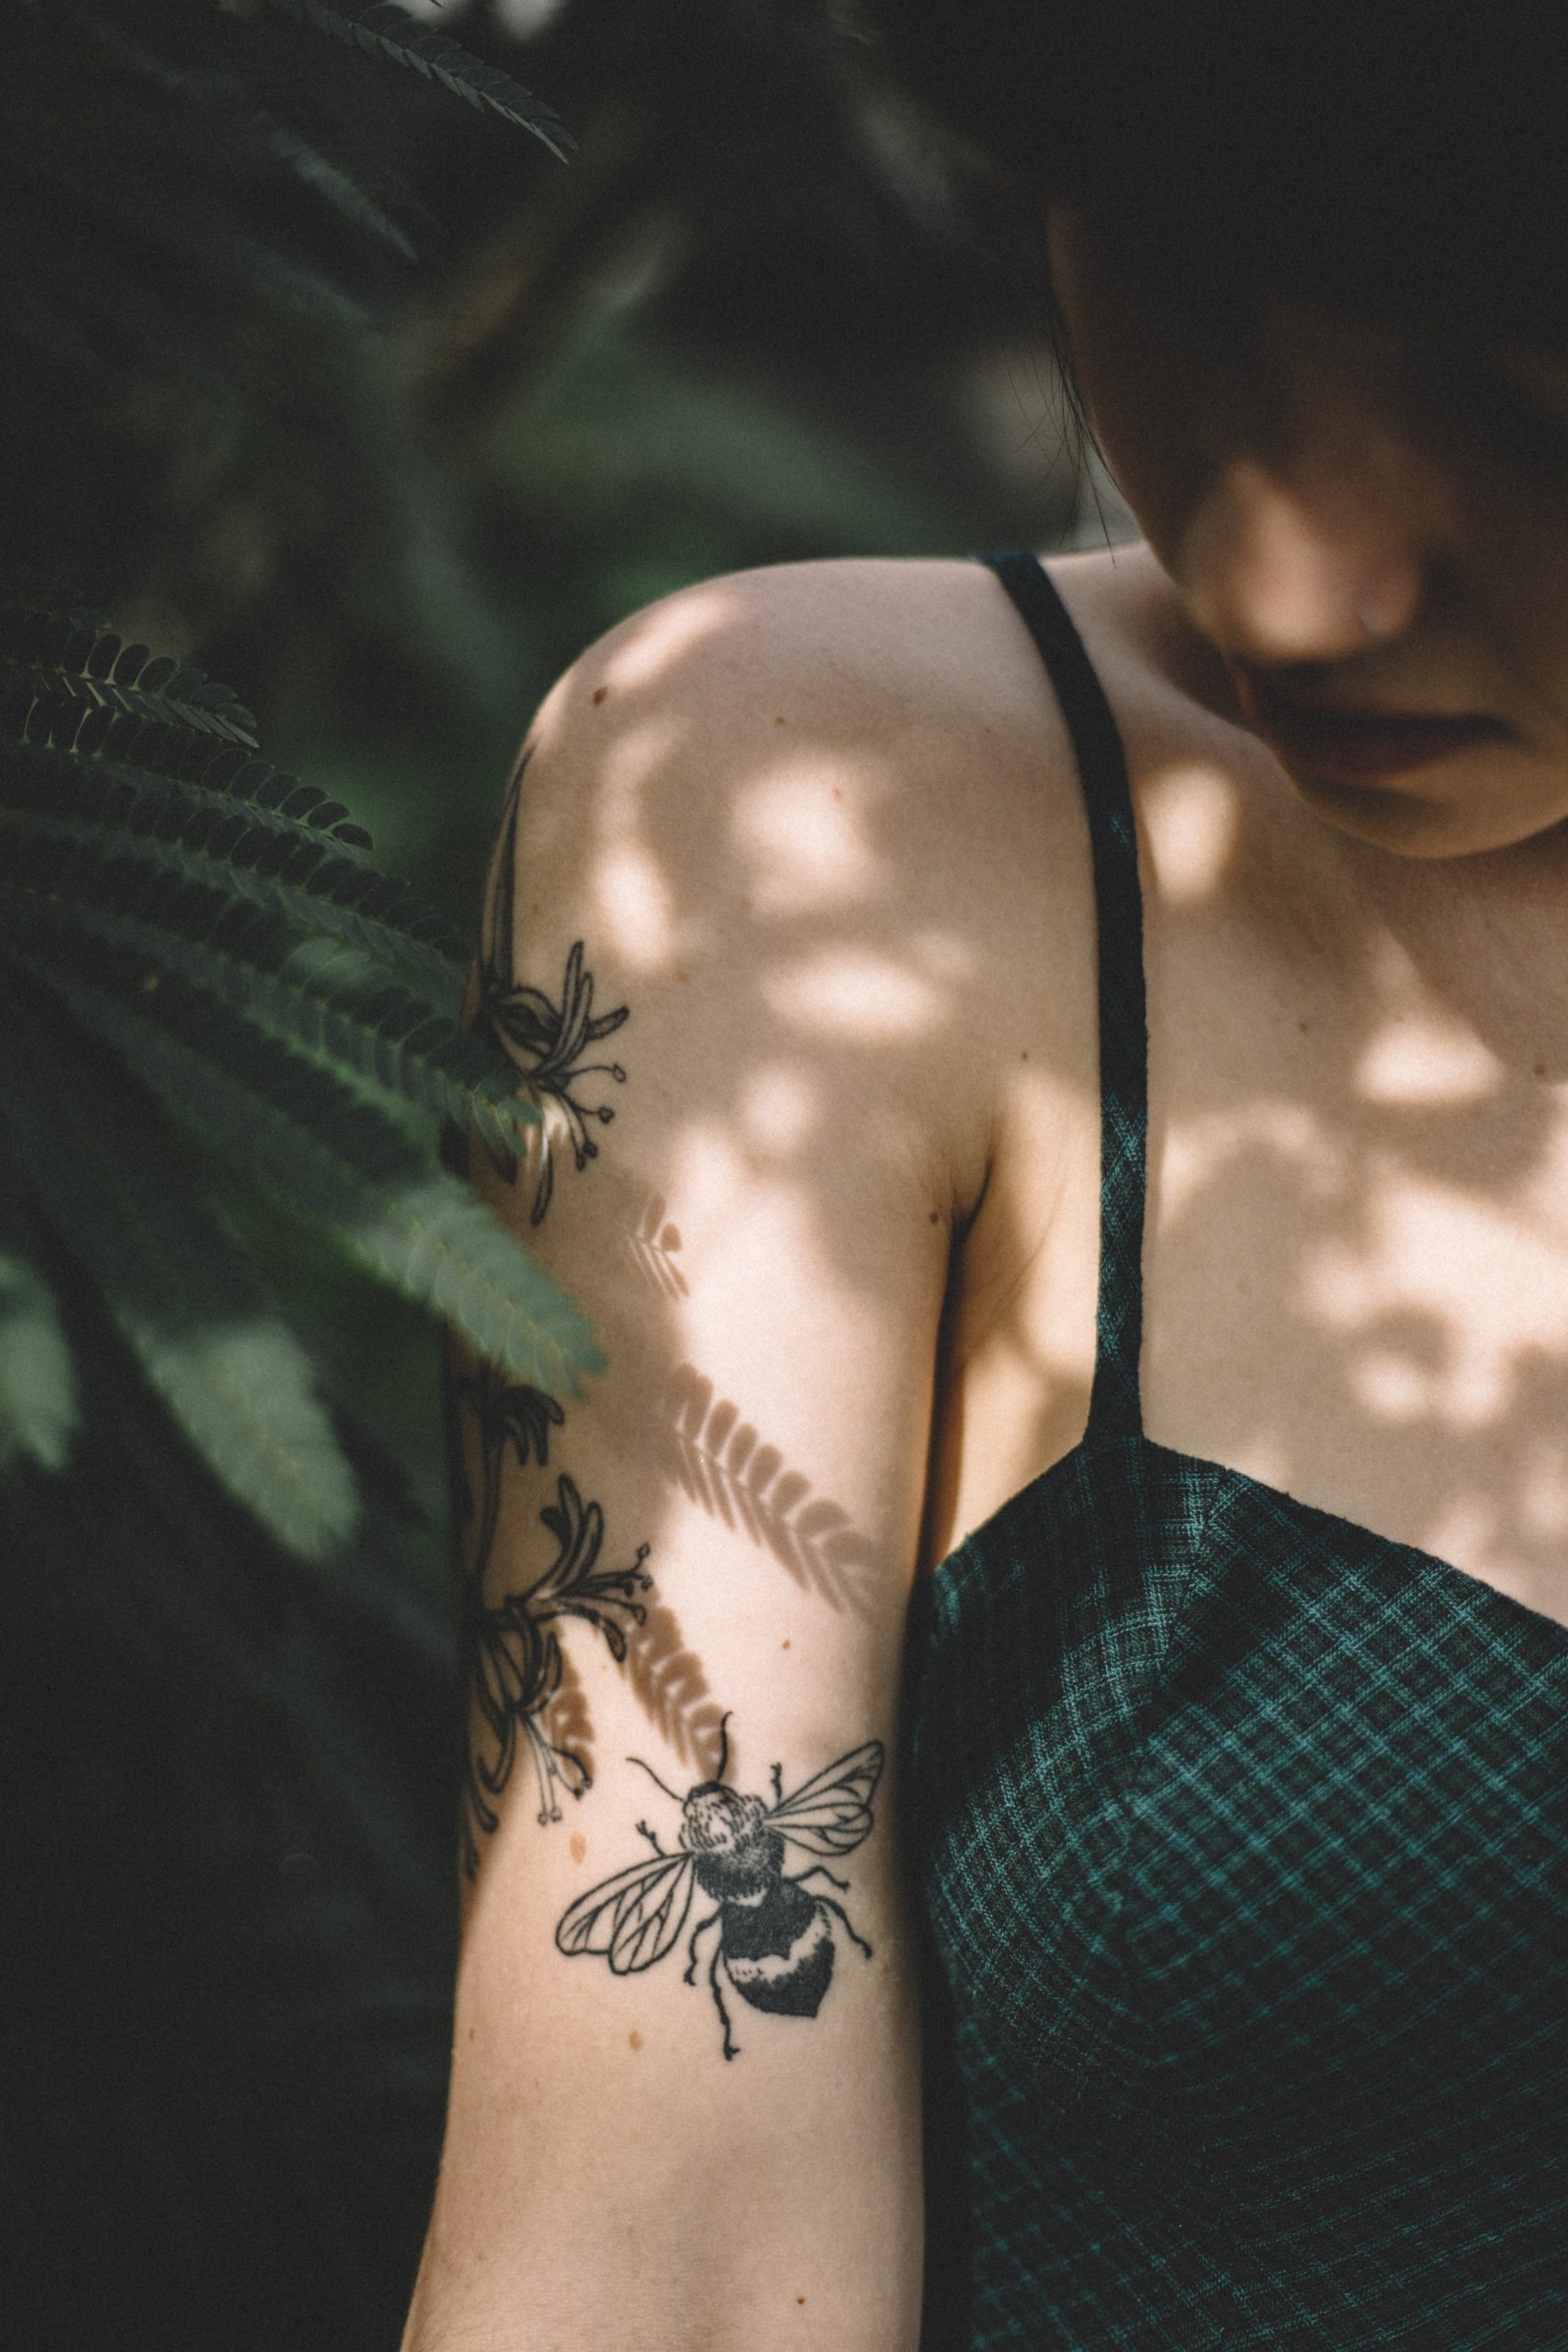 7 Tattoo Aftercare Rules For After Getting a Tattoo - Tattoo Goo